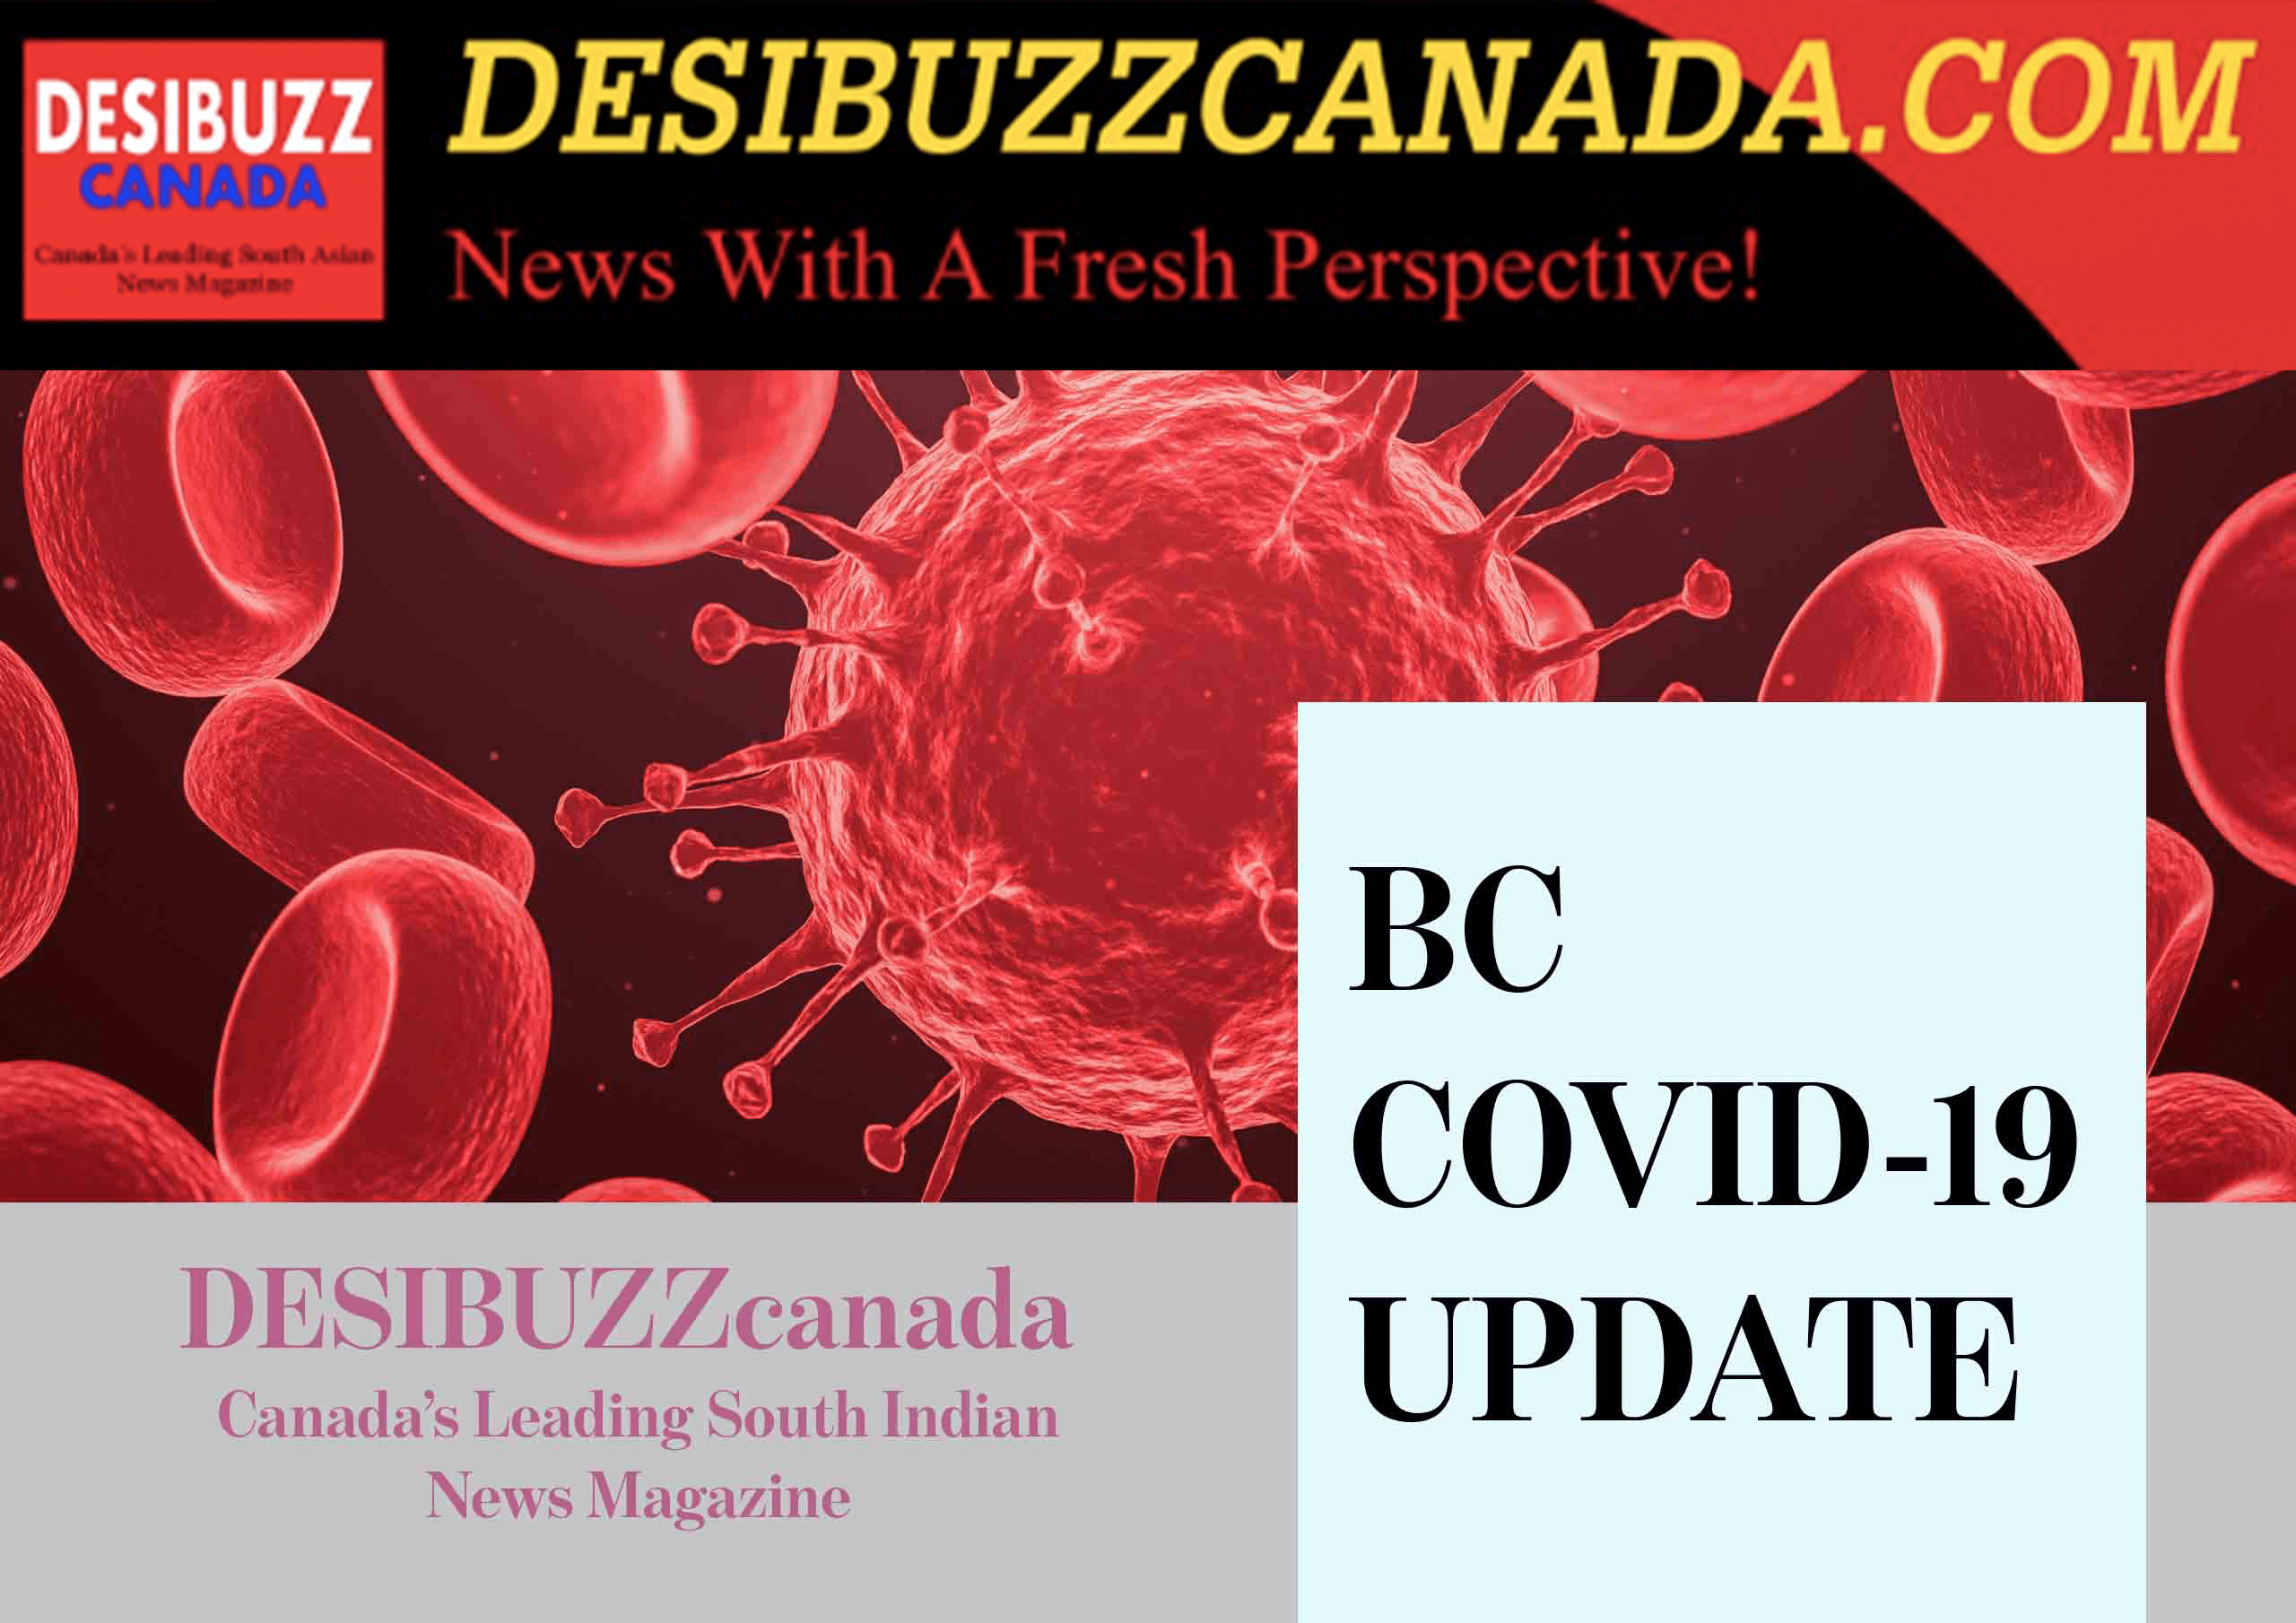 BC COVID-19 DAILY UPDATE: Cases Remain Low As Four New Deaths Reported Thursday